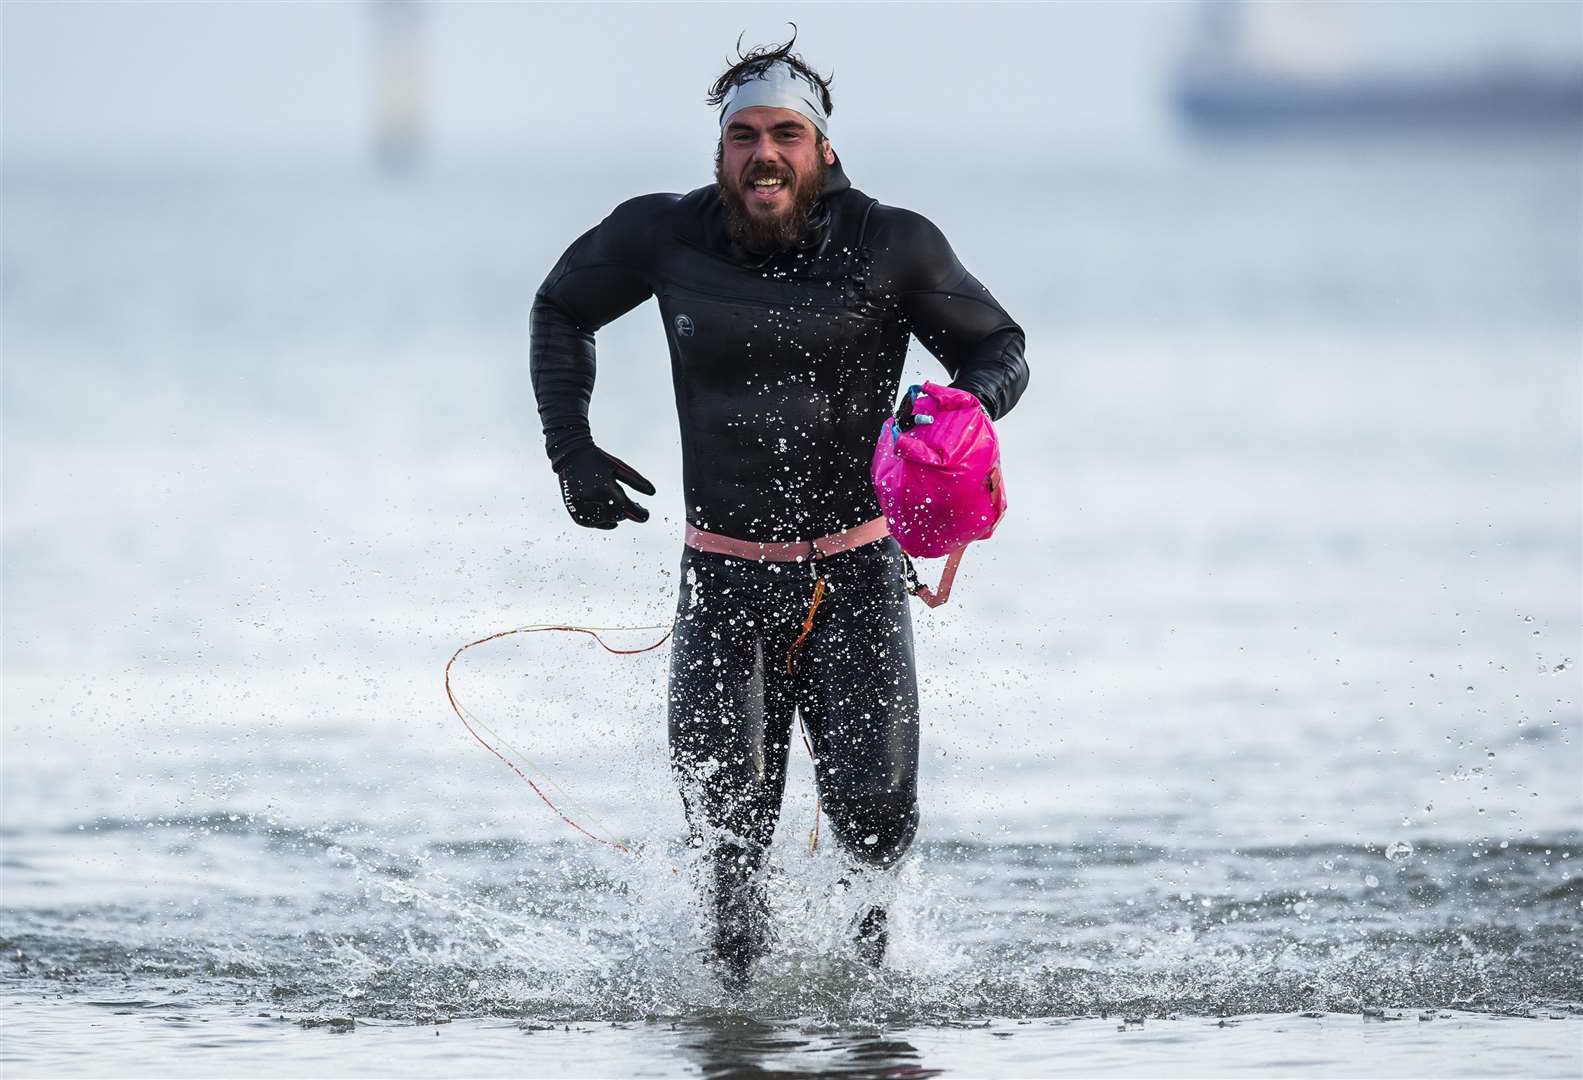 Ross Edgley runs to the finish of the Great British Swim in Margate, UK on November 4th 2018. // Alex Broadway / Red Bull Content Pool // AP-1XDMAH7EN2111 // Usage for editorial use only // Please go to www.redbullcontentpool.com for further information. //. (5995969)